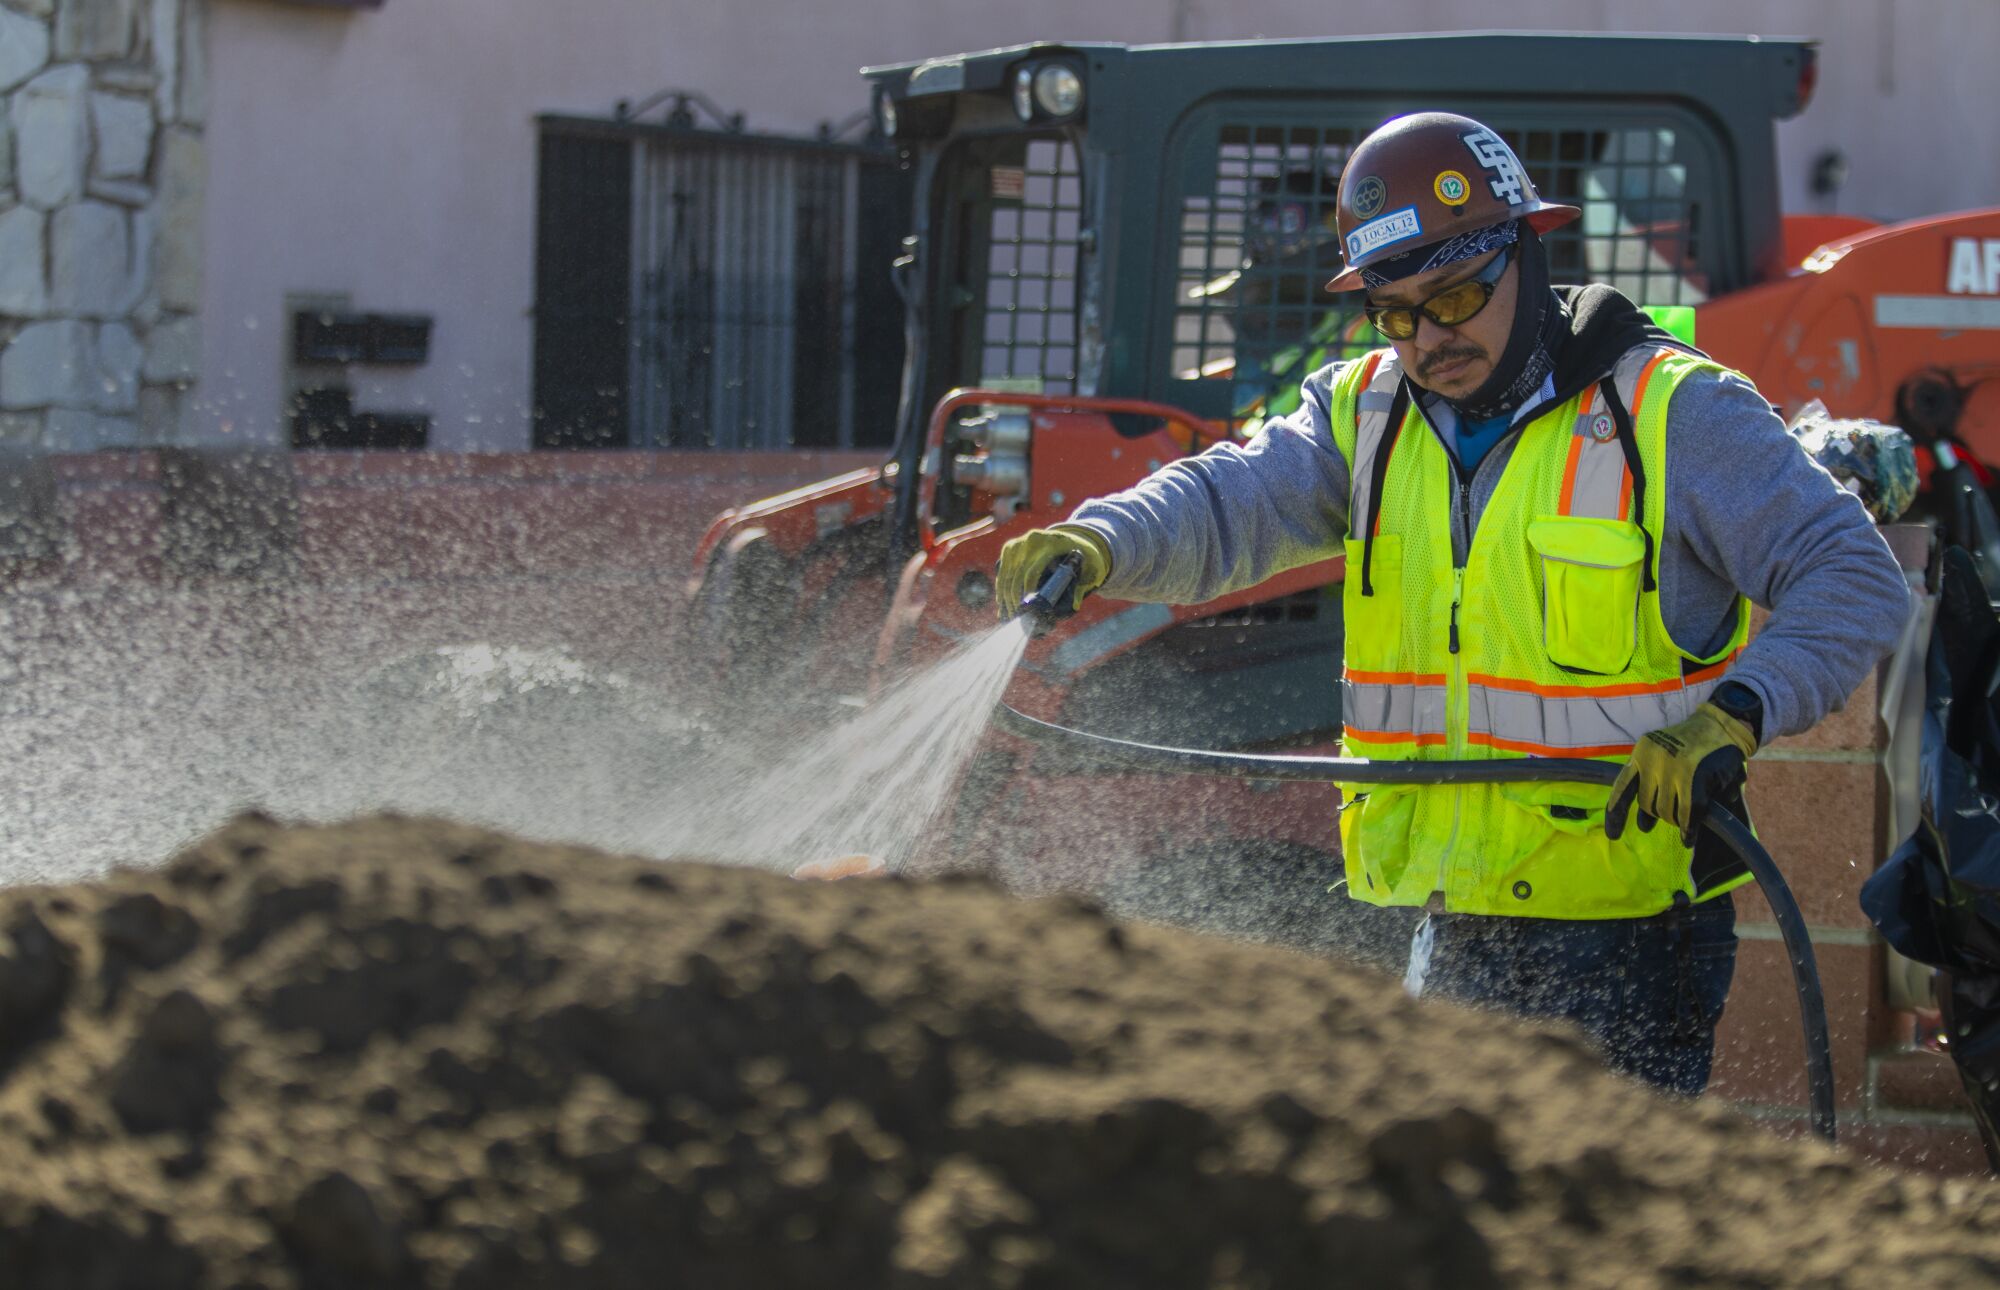 A worker sprays water on a pile of soil.